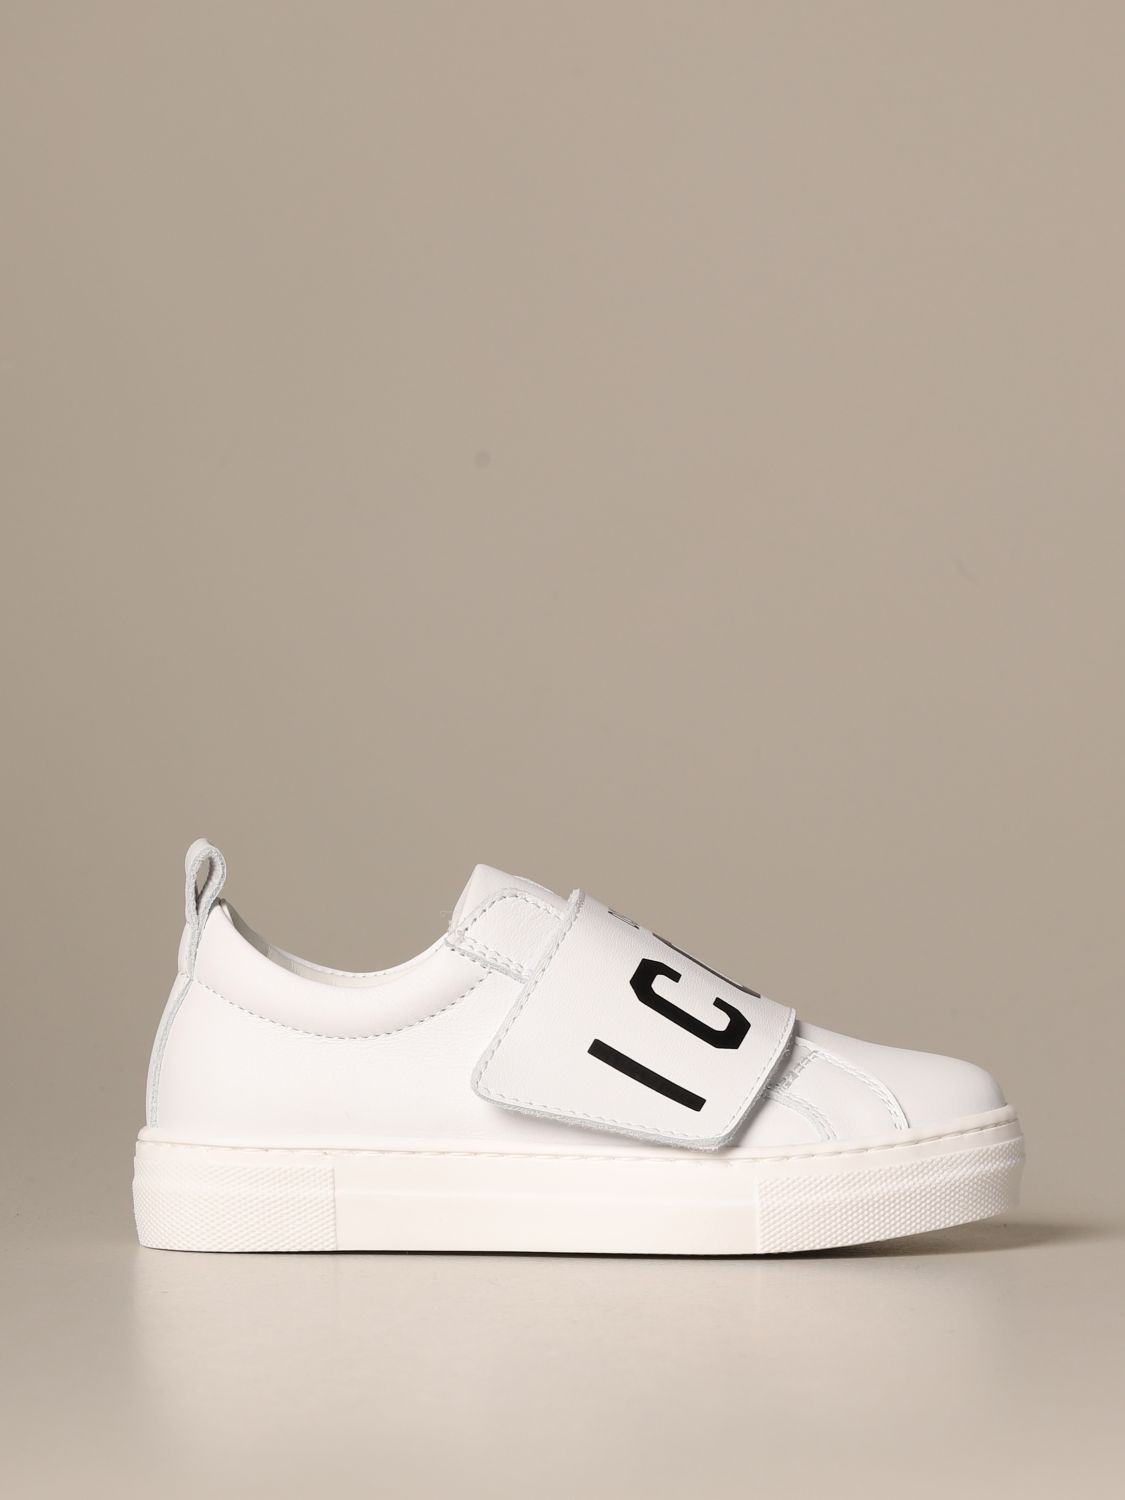 dsquared kinder sneakers sale